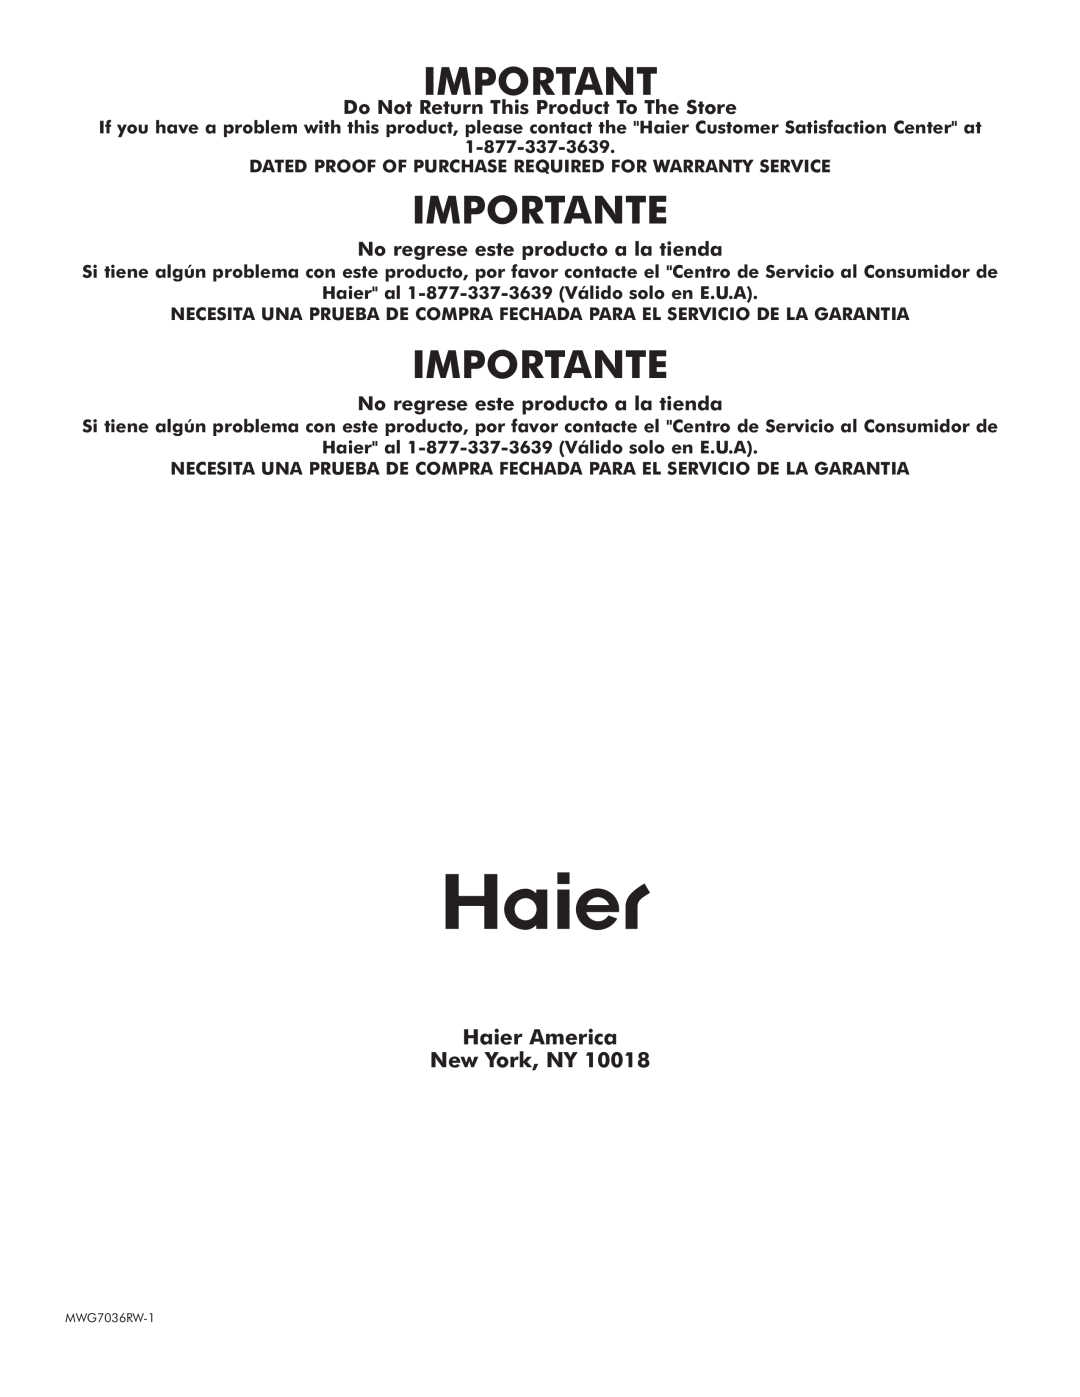 Haier MWG7036RW/B owner manual Haier America New York, NY, Importante, Do Not Return This Product To The Store 